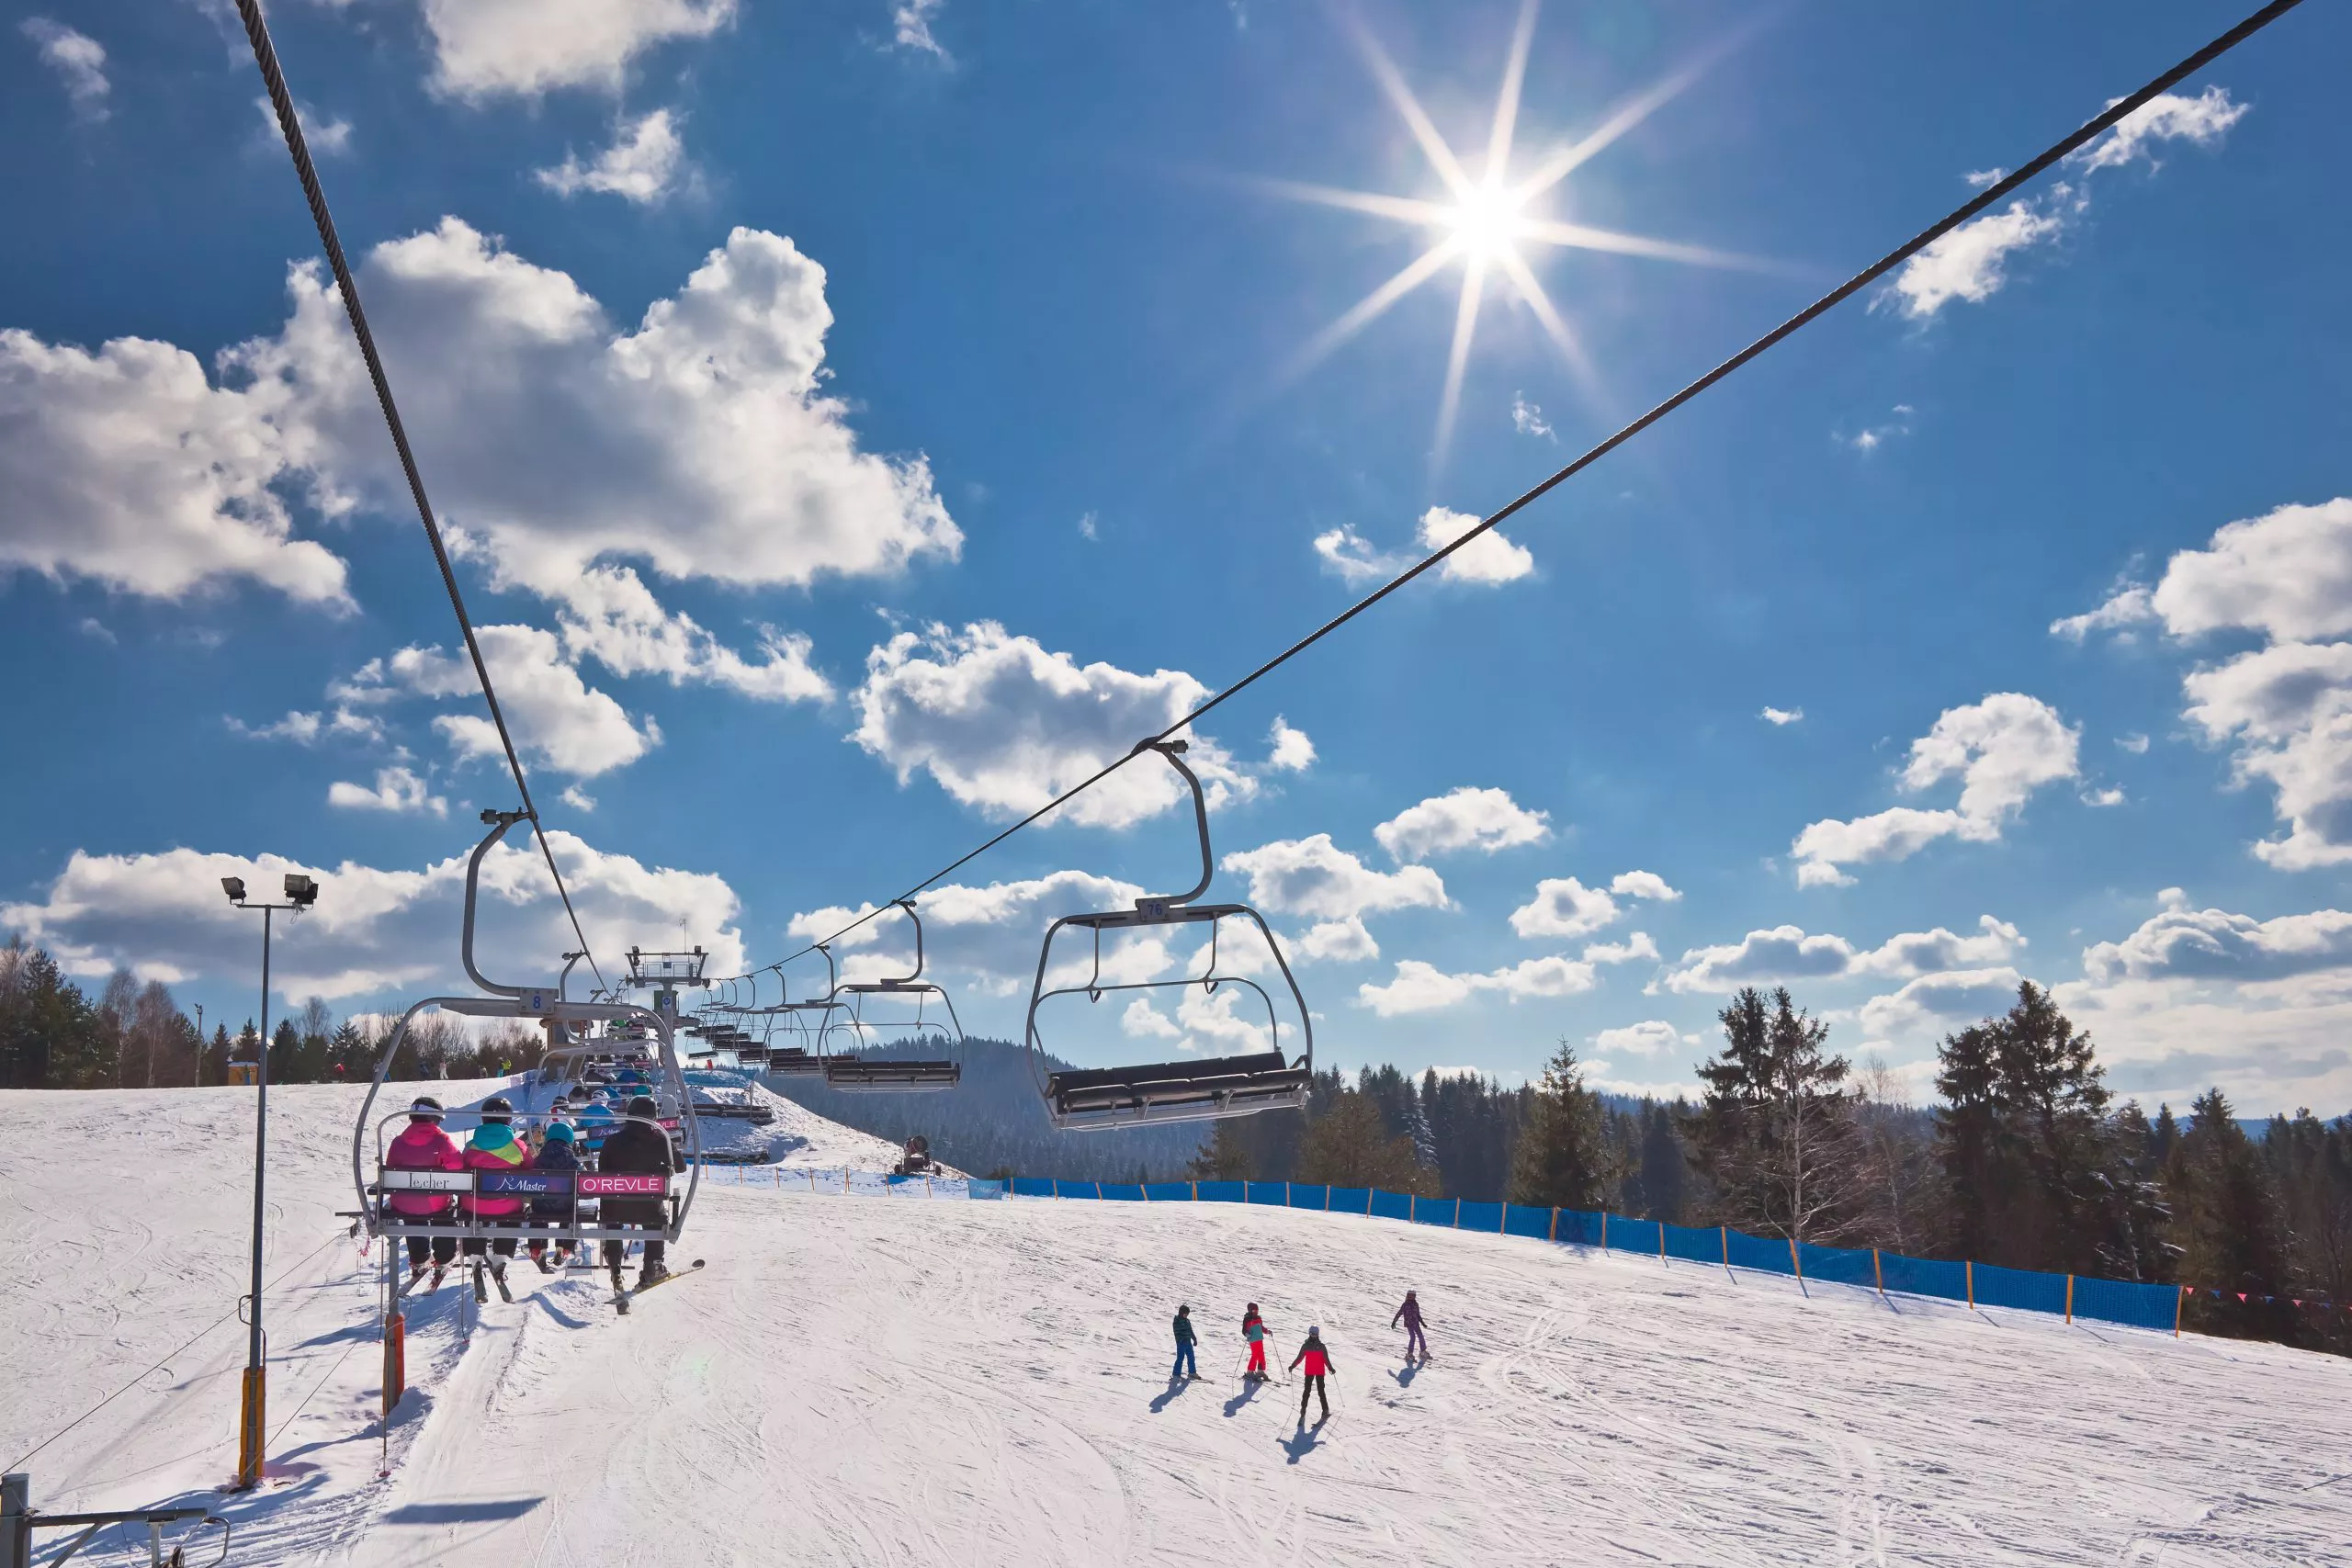 Four small silhouettes on a snowy piste centre bottom; on the left, a chair ski lift takes other skiers to the top; most of the picture is taken by the skies with some clouds and the sun.